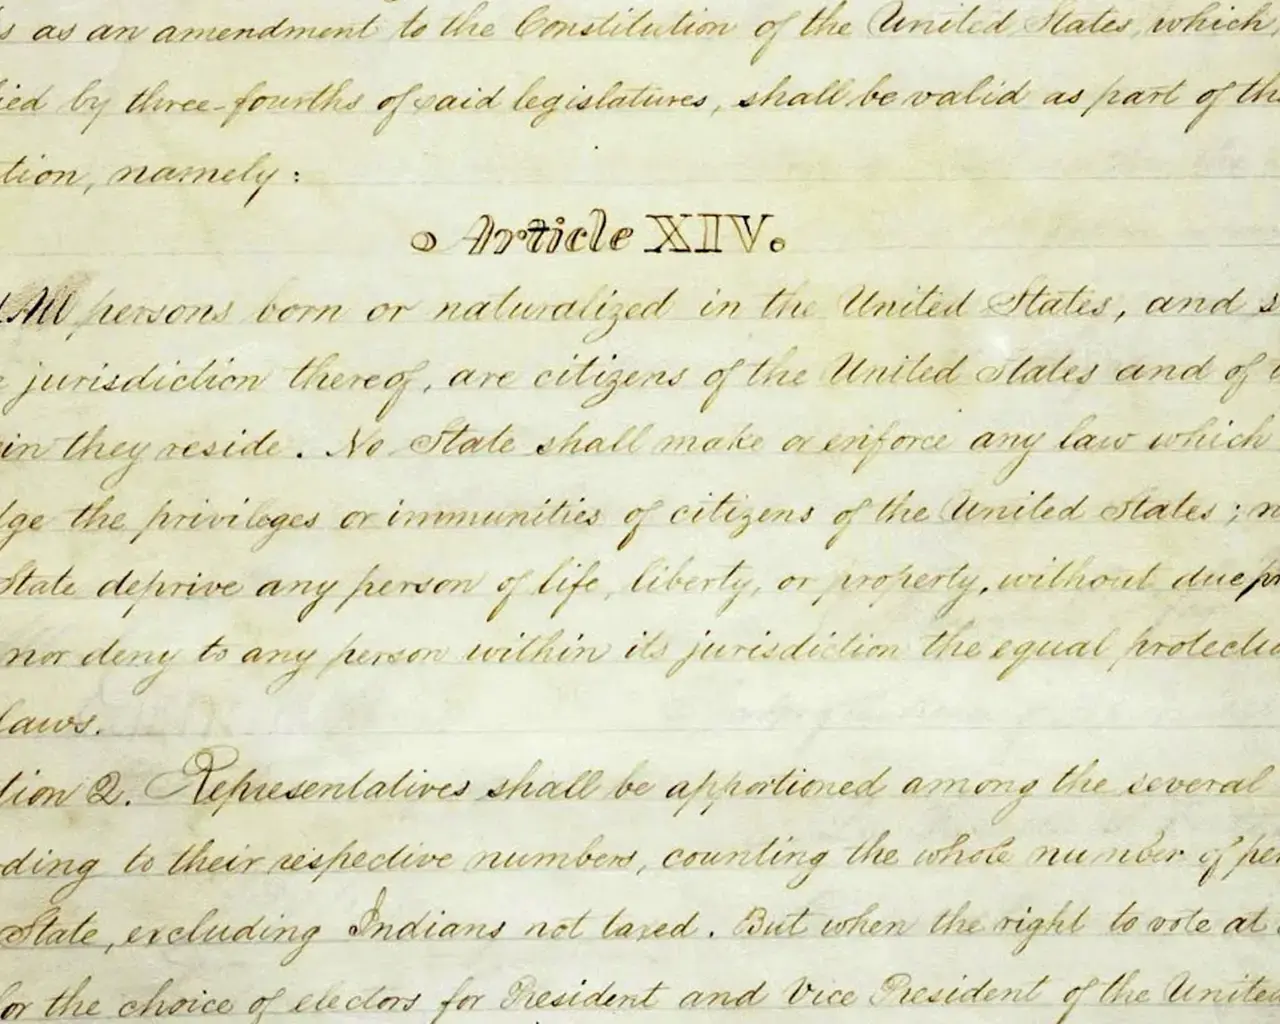 "Reconstruction and the Fourteenth Amendment Project," the 14th Amendment, adopted July 28, 1868. Photo courtesy of the National Constitution Center.